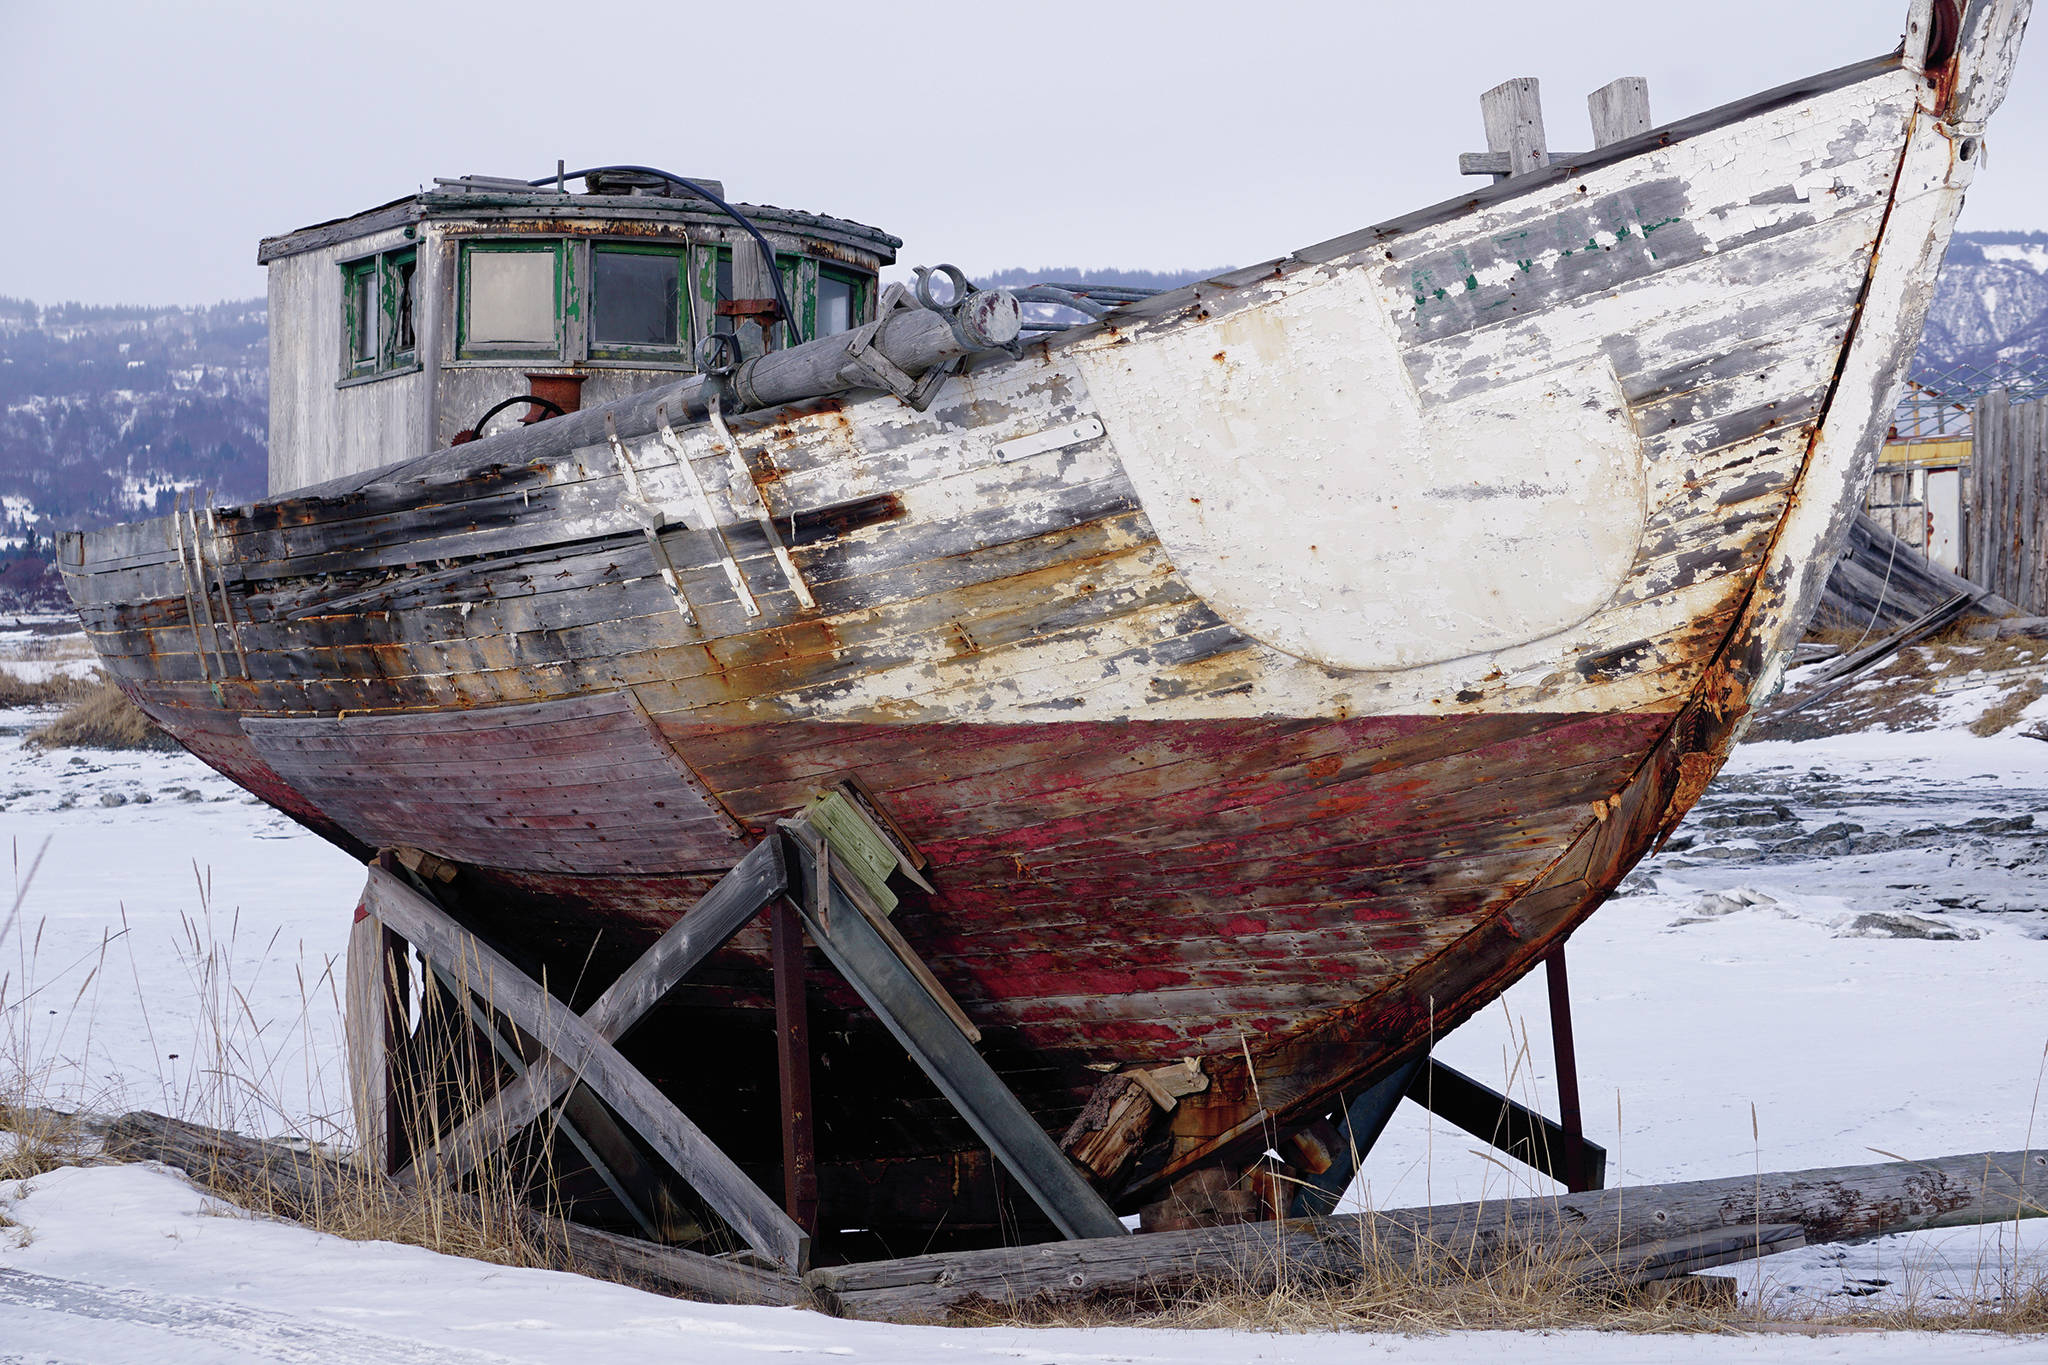 The Altair braves the elements on the Homer Spit on Feb. 14, 2020, in Homer, Alaska. The classic wooden boat is frequently photographed or painted. (Photo by Michael Armstrong/Homer News)